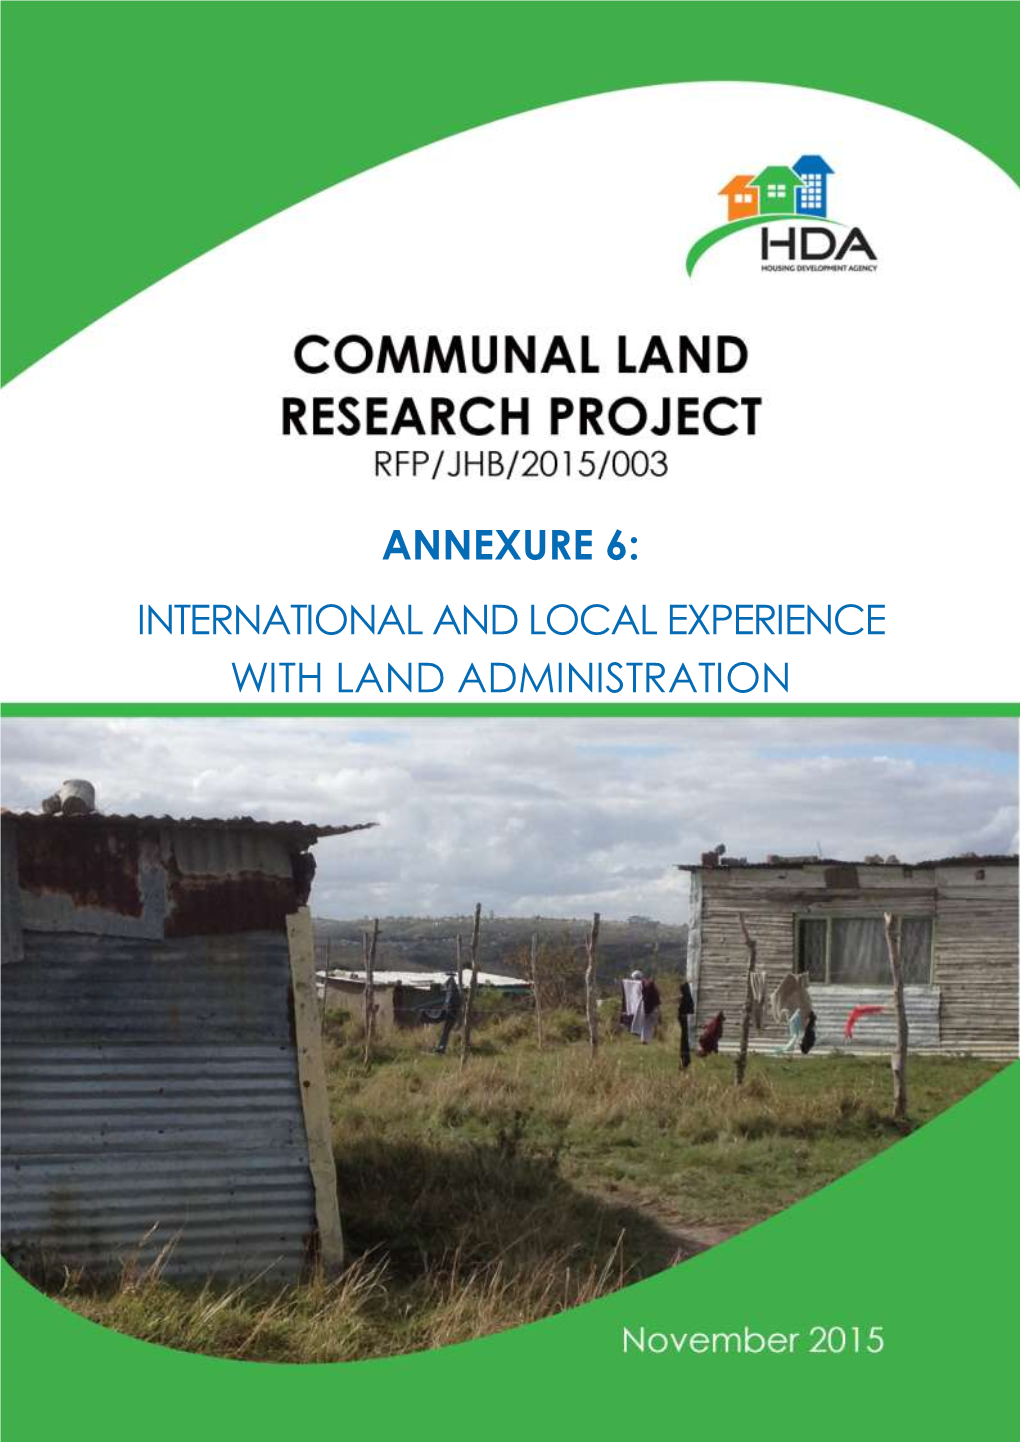 Annexure 6: International and Local Experience with Land Administration